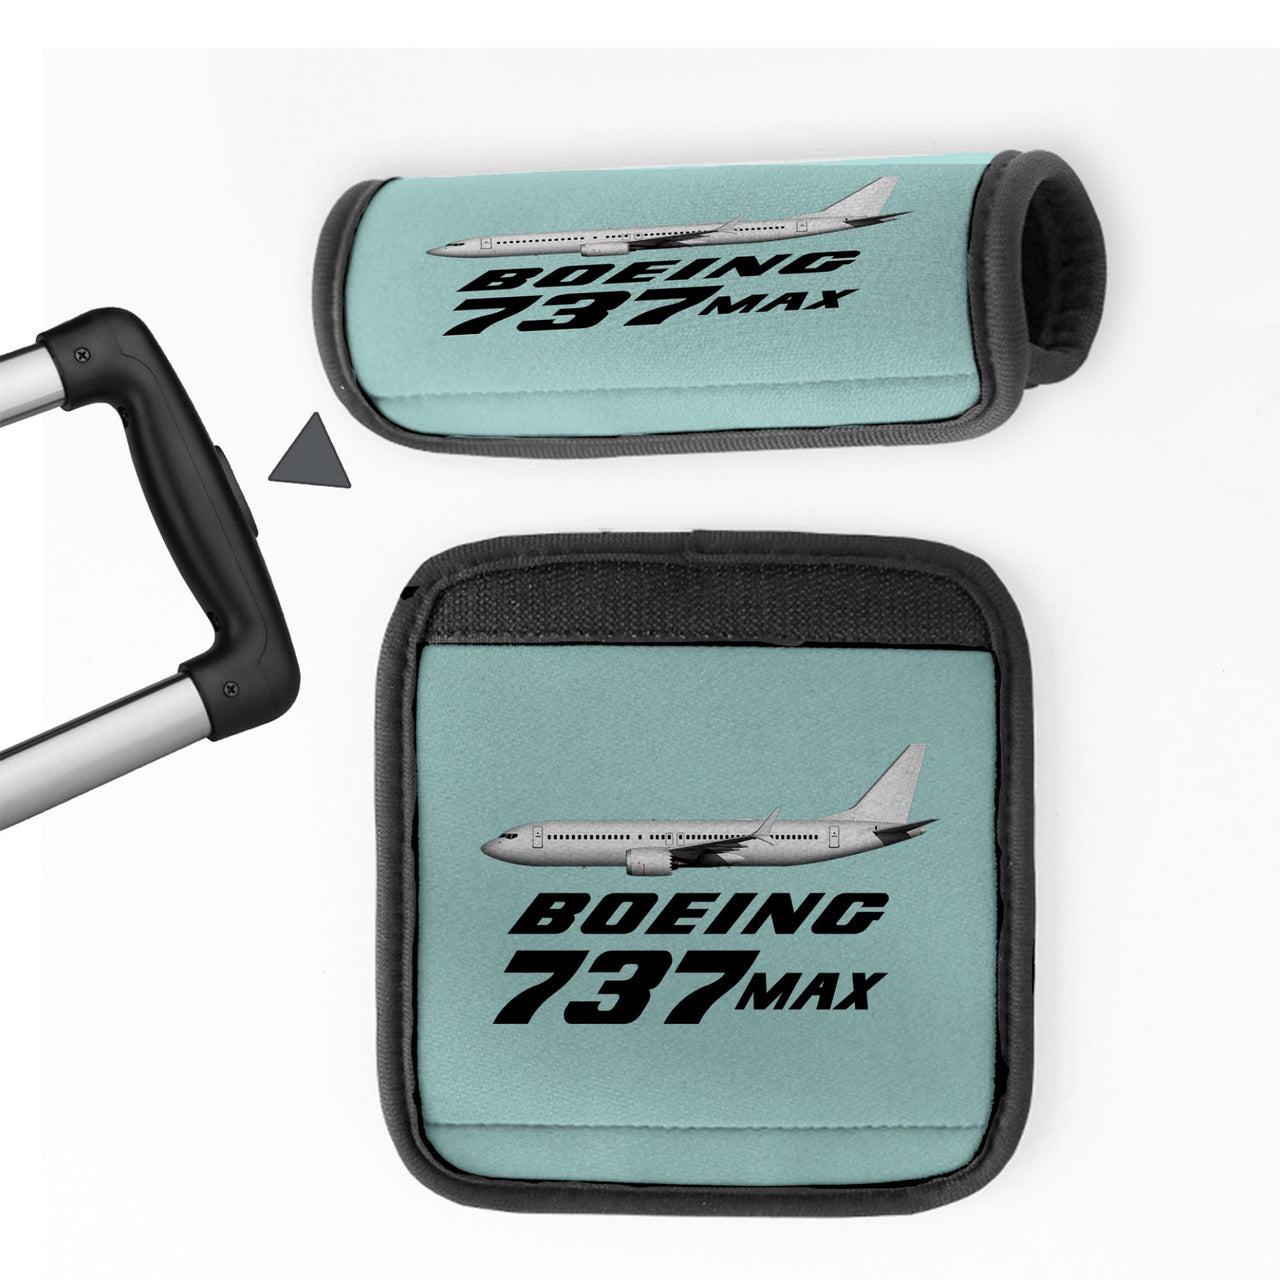 The Boeing 737Max Designed Neoprene Luggage Handle Covers